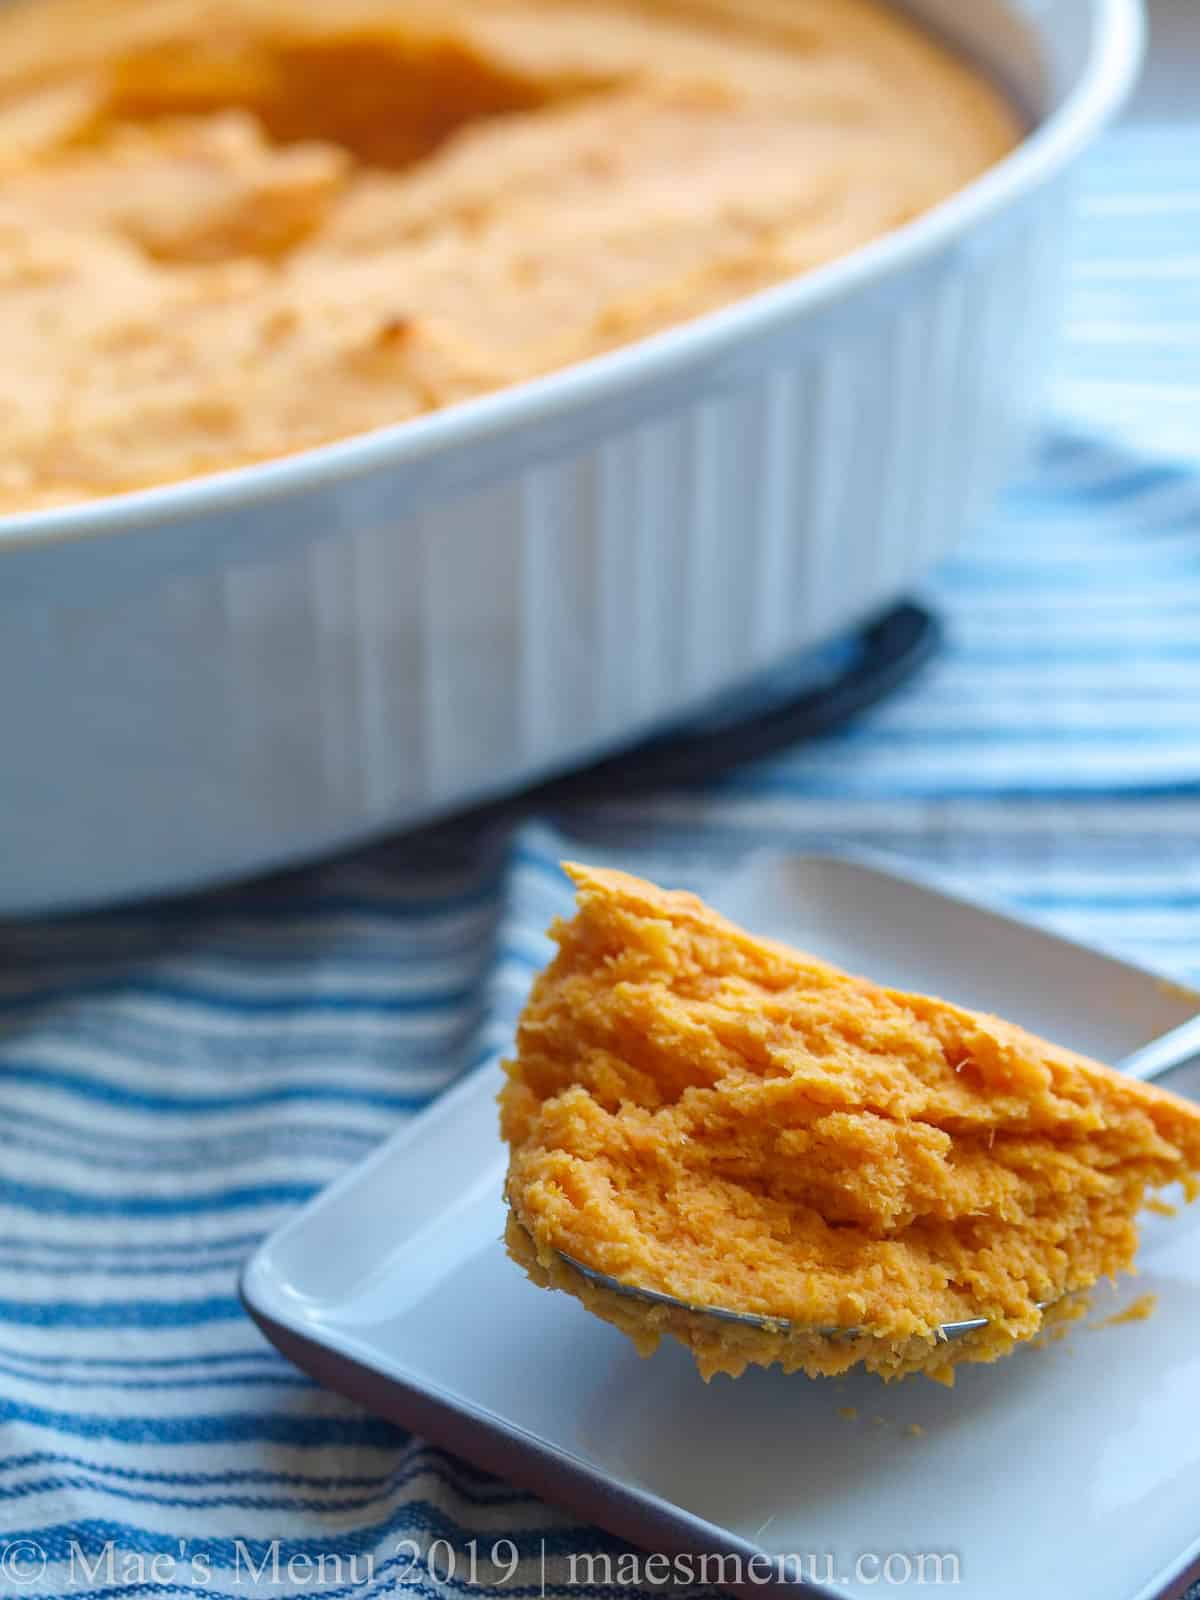 A large scoop of healthy sweet potato souffle